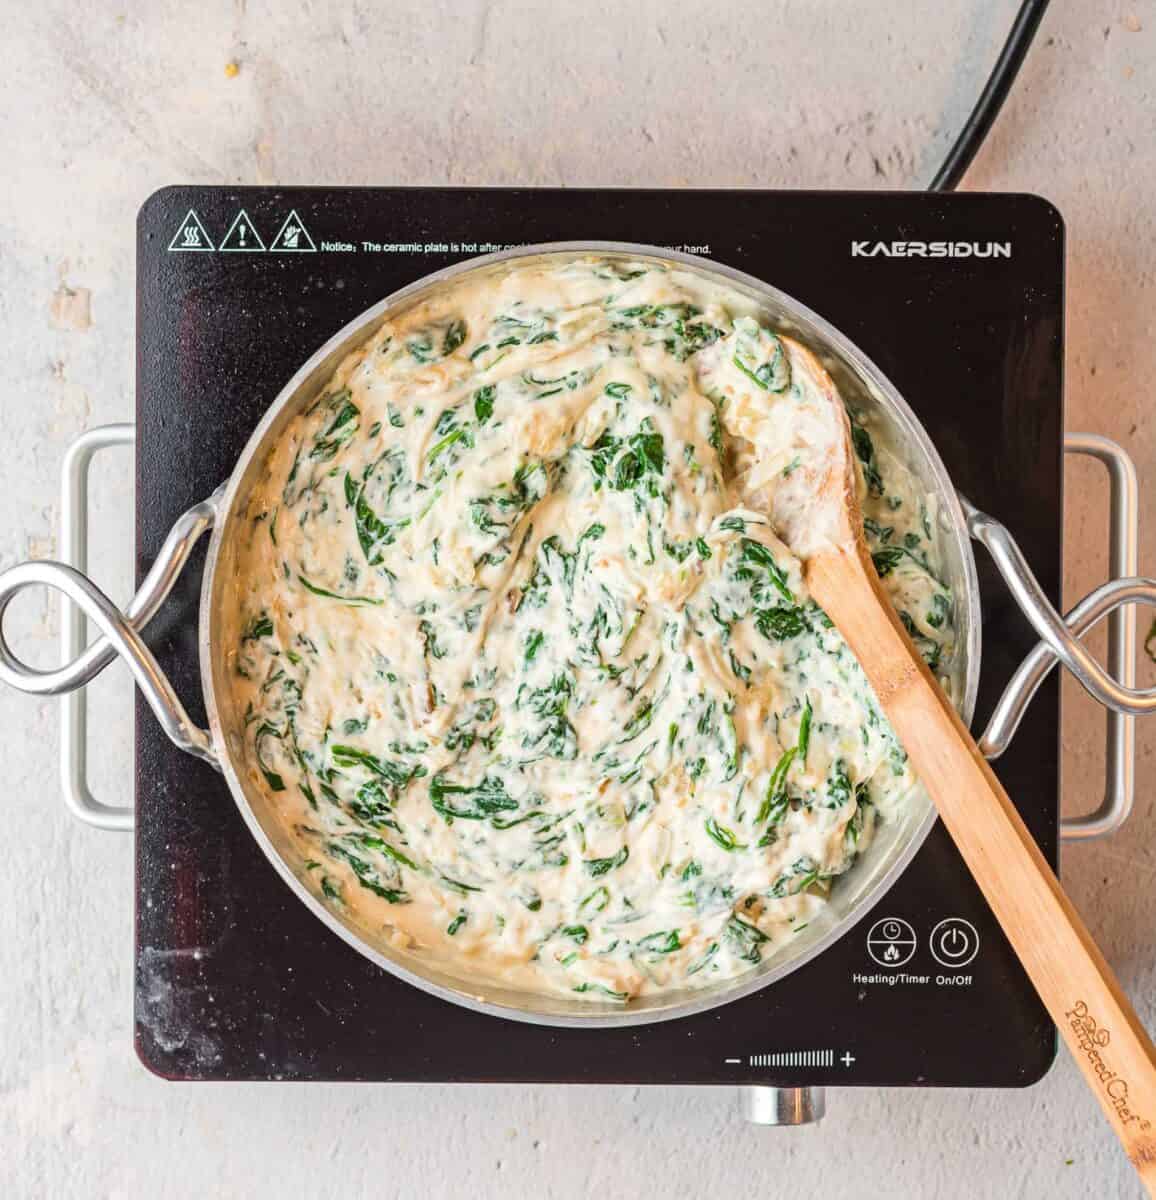 creamed spinach is being cooked in a skillet.